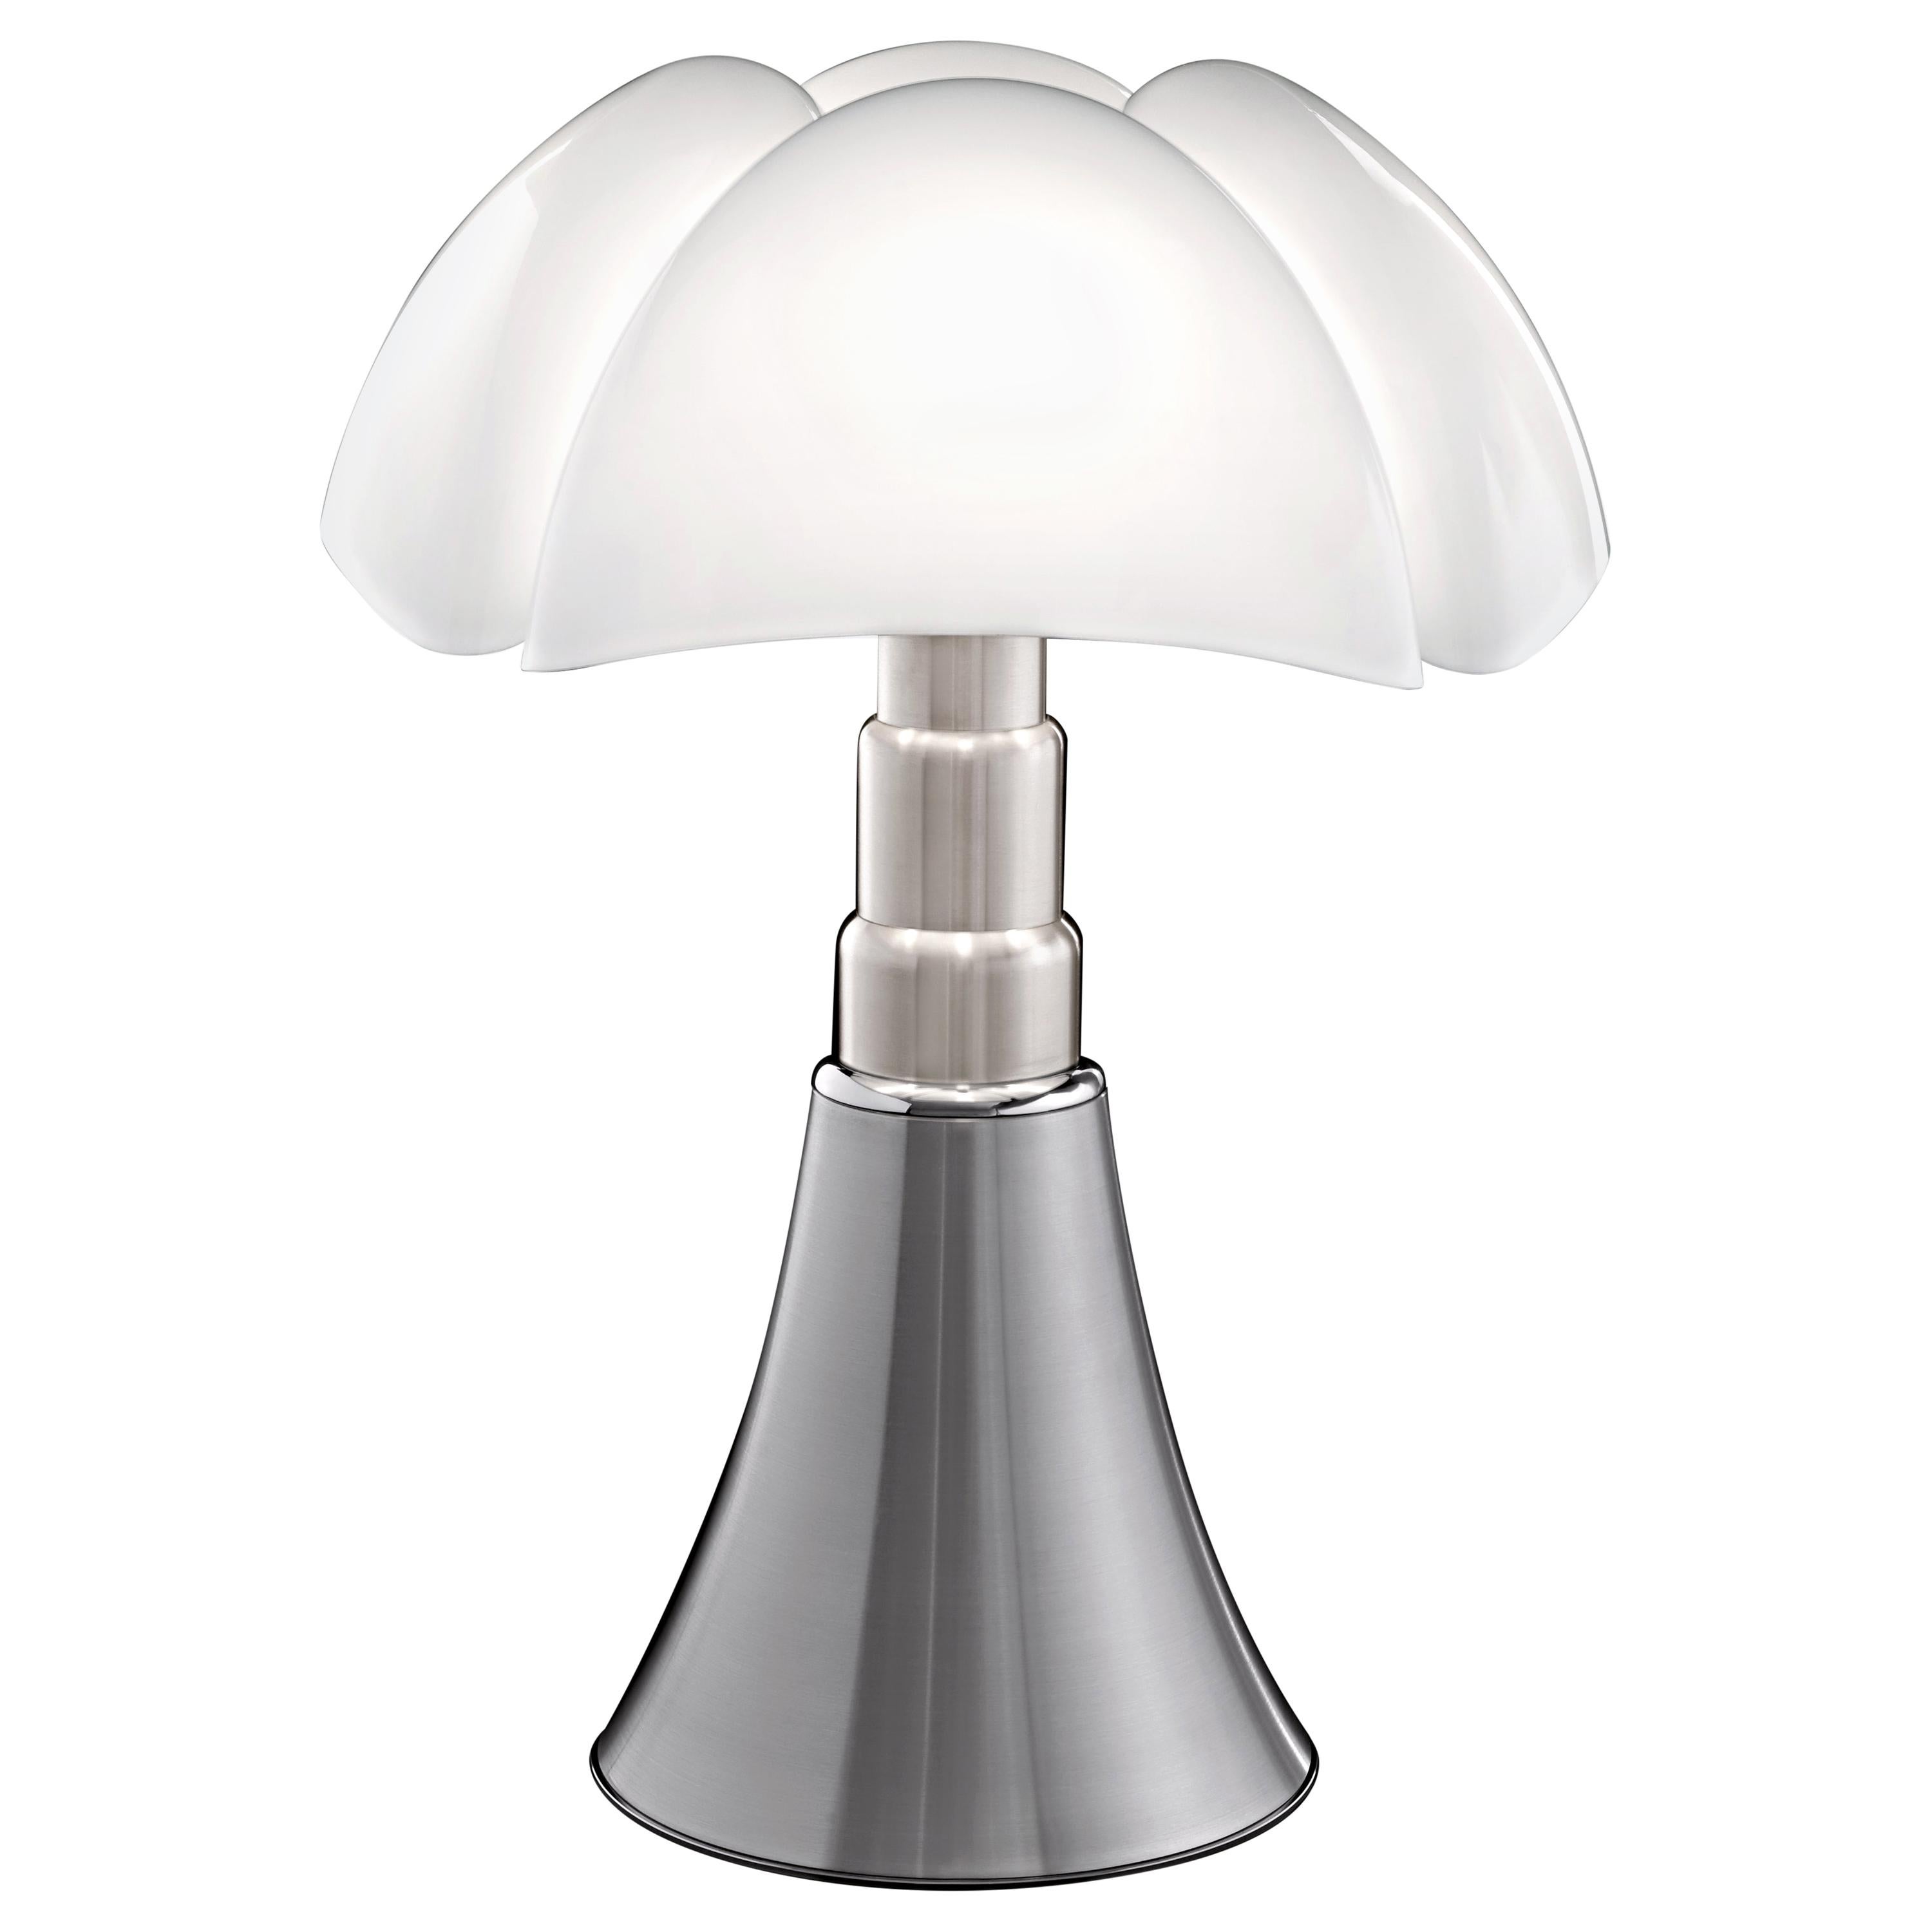 Martinelli Luce Dimmable LED Pipistrello 620 Table Lamp by Gae Aulenti